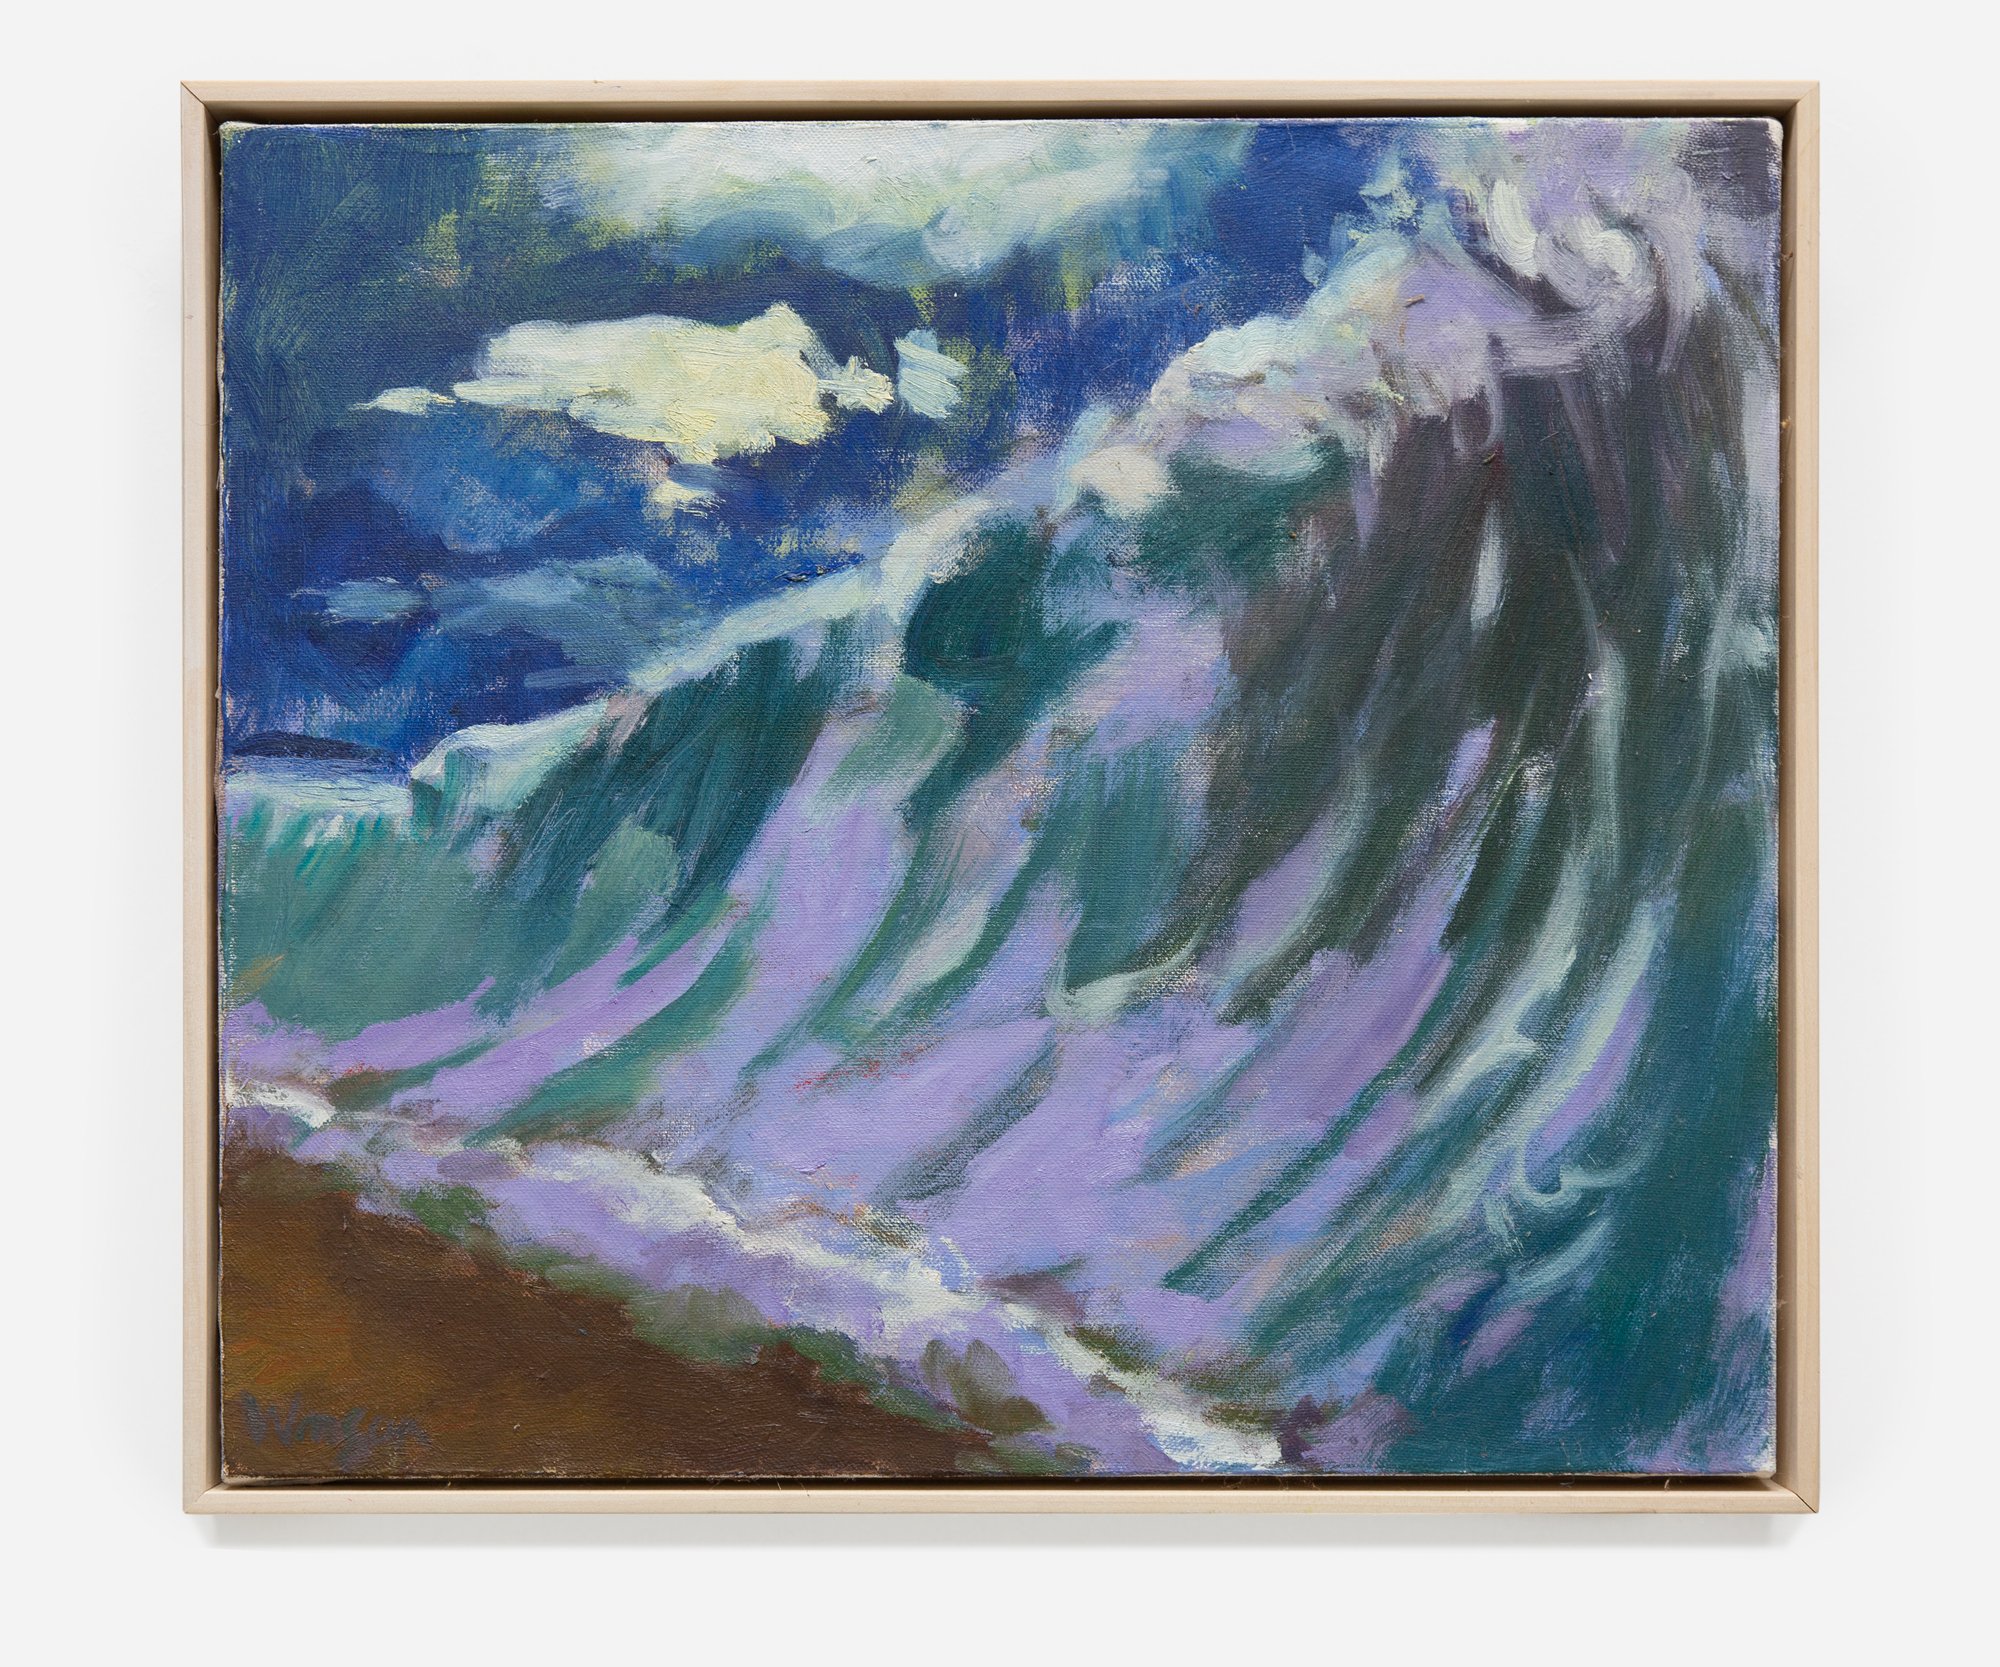     Heard the roar of a wave that could cover the whole world , 2016, oil on canvas, 14 x 16”       